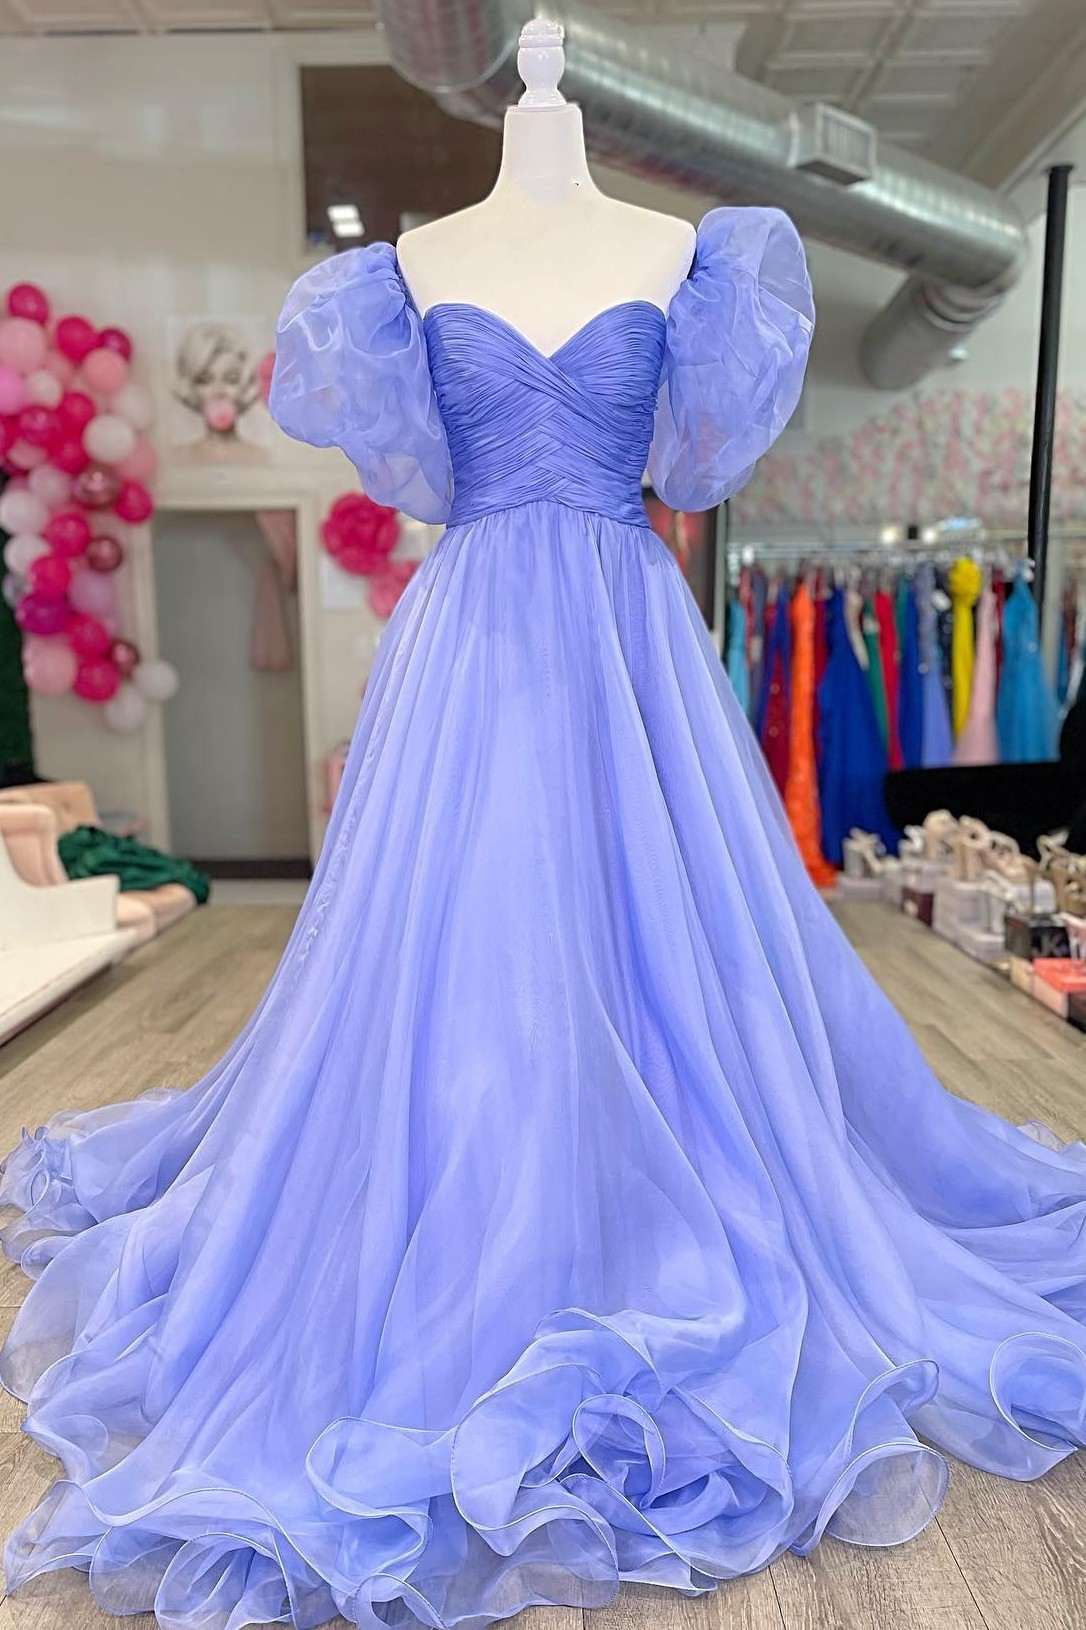 Lavender Strapless A-Line Organza Court Train Corset Prom Dress with Puff Sleeves Gowns, Homecoming Dress Shops